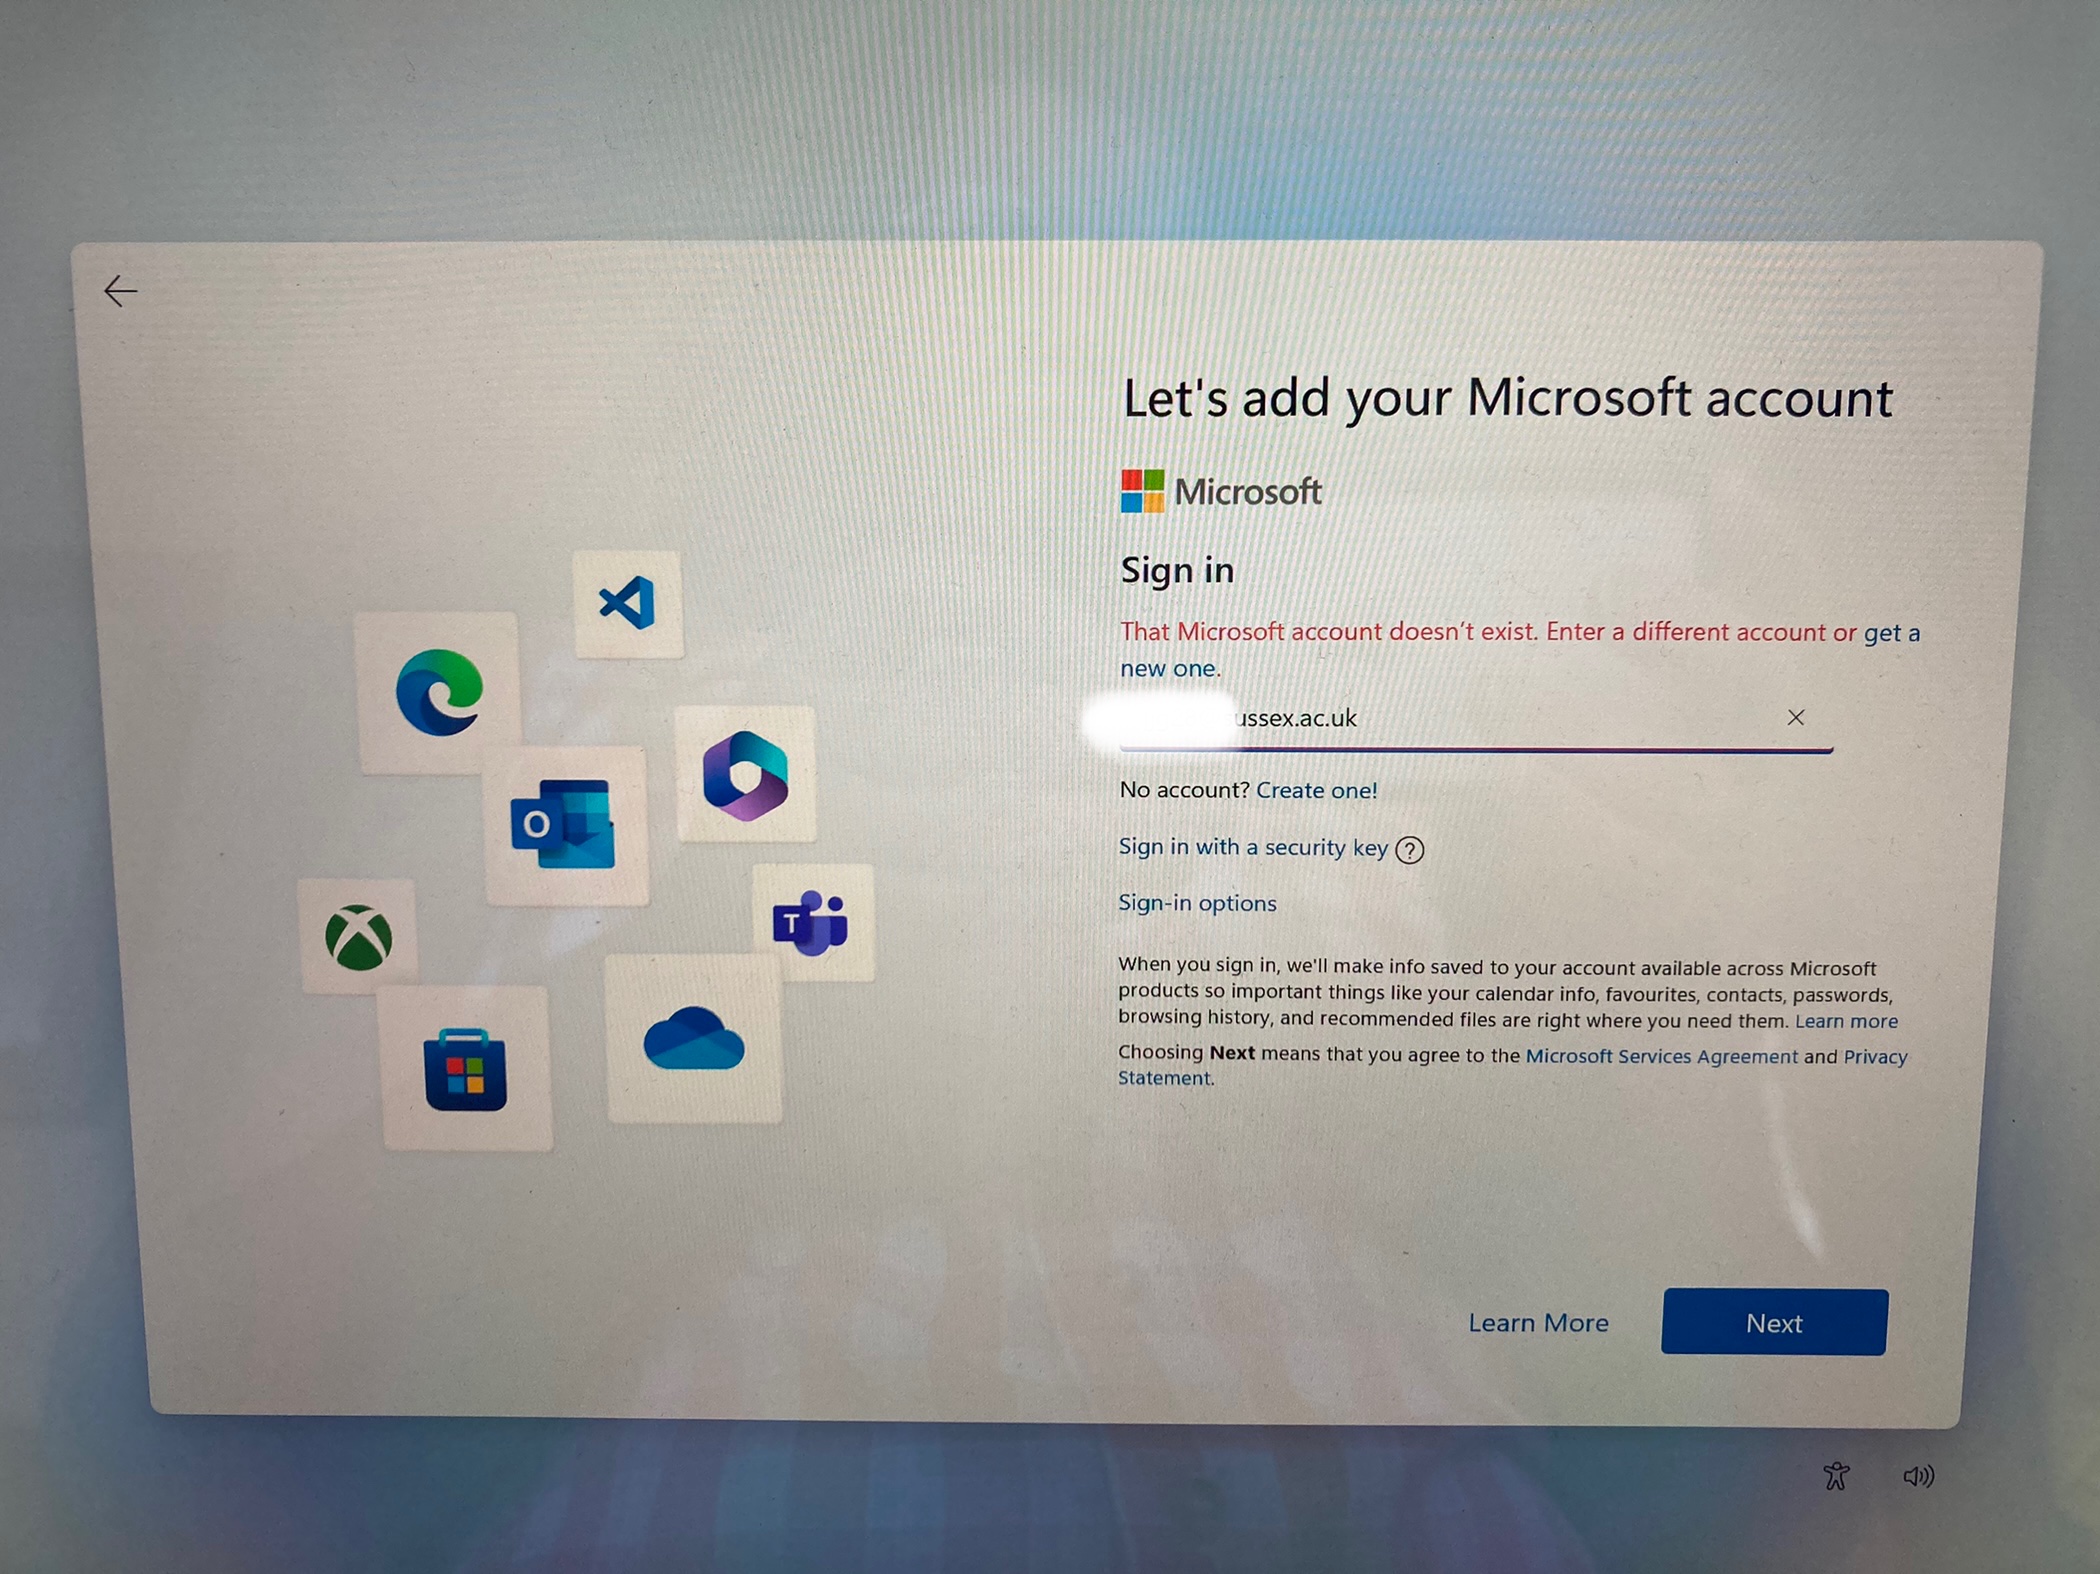 How to sign in to a Microsoft account - Microsoft Support